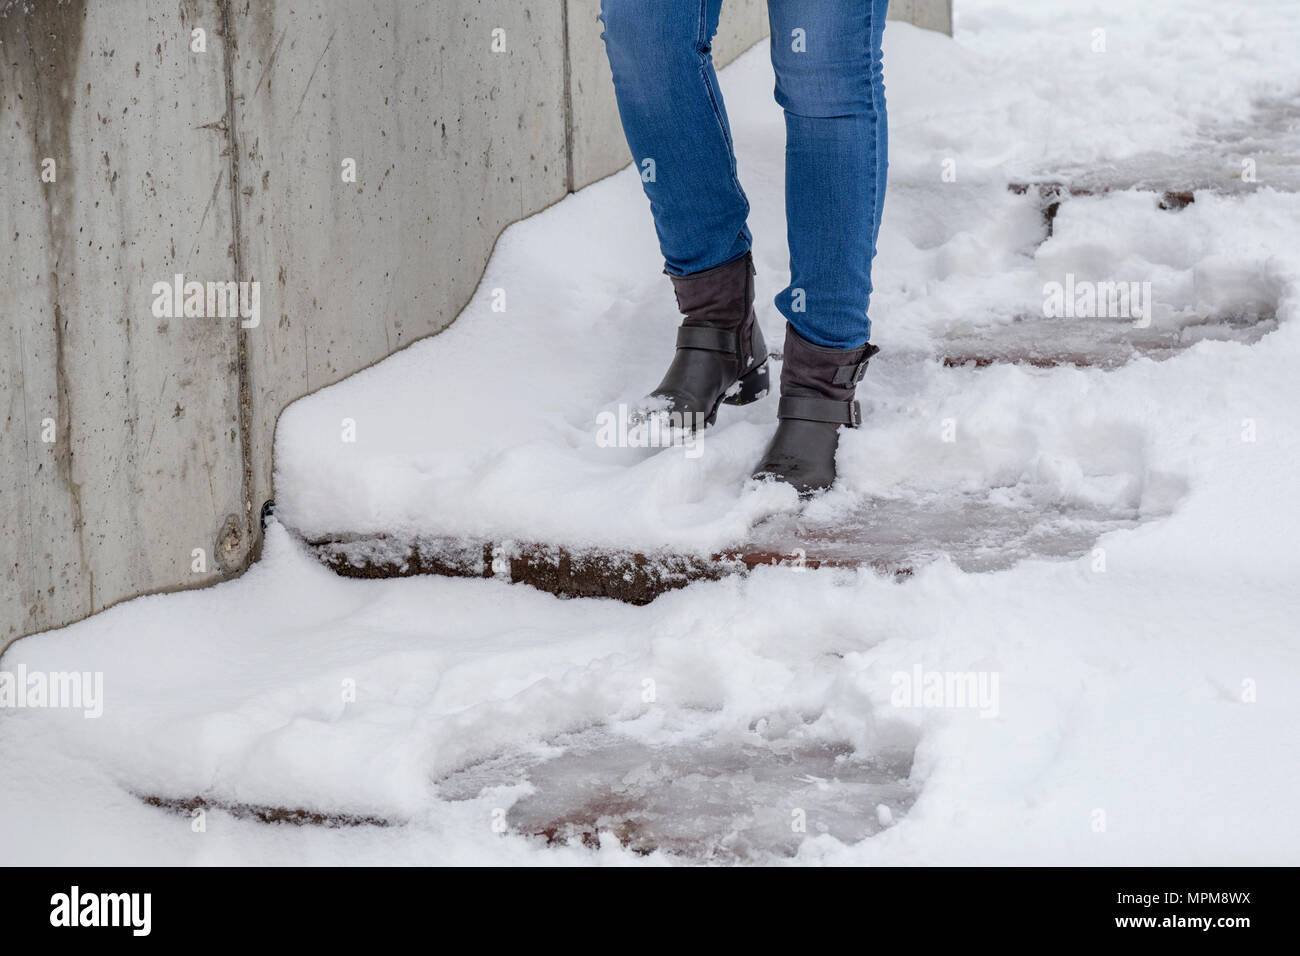 Female legs wearing boots going down the stairs on snowy pathway at winter. Stock Photo